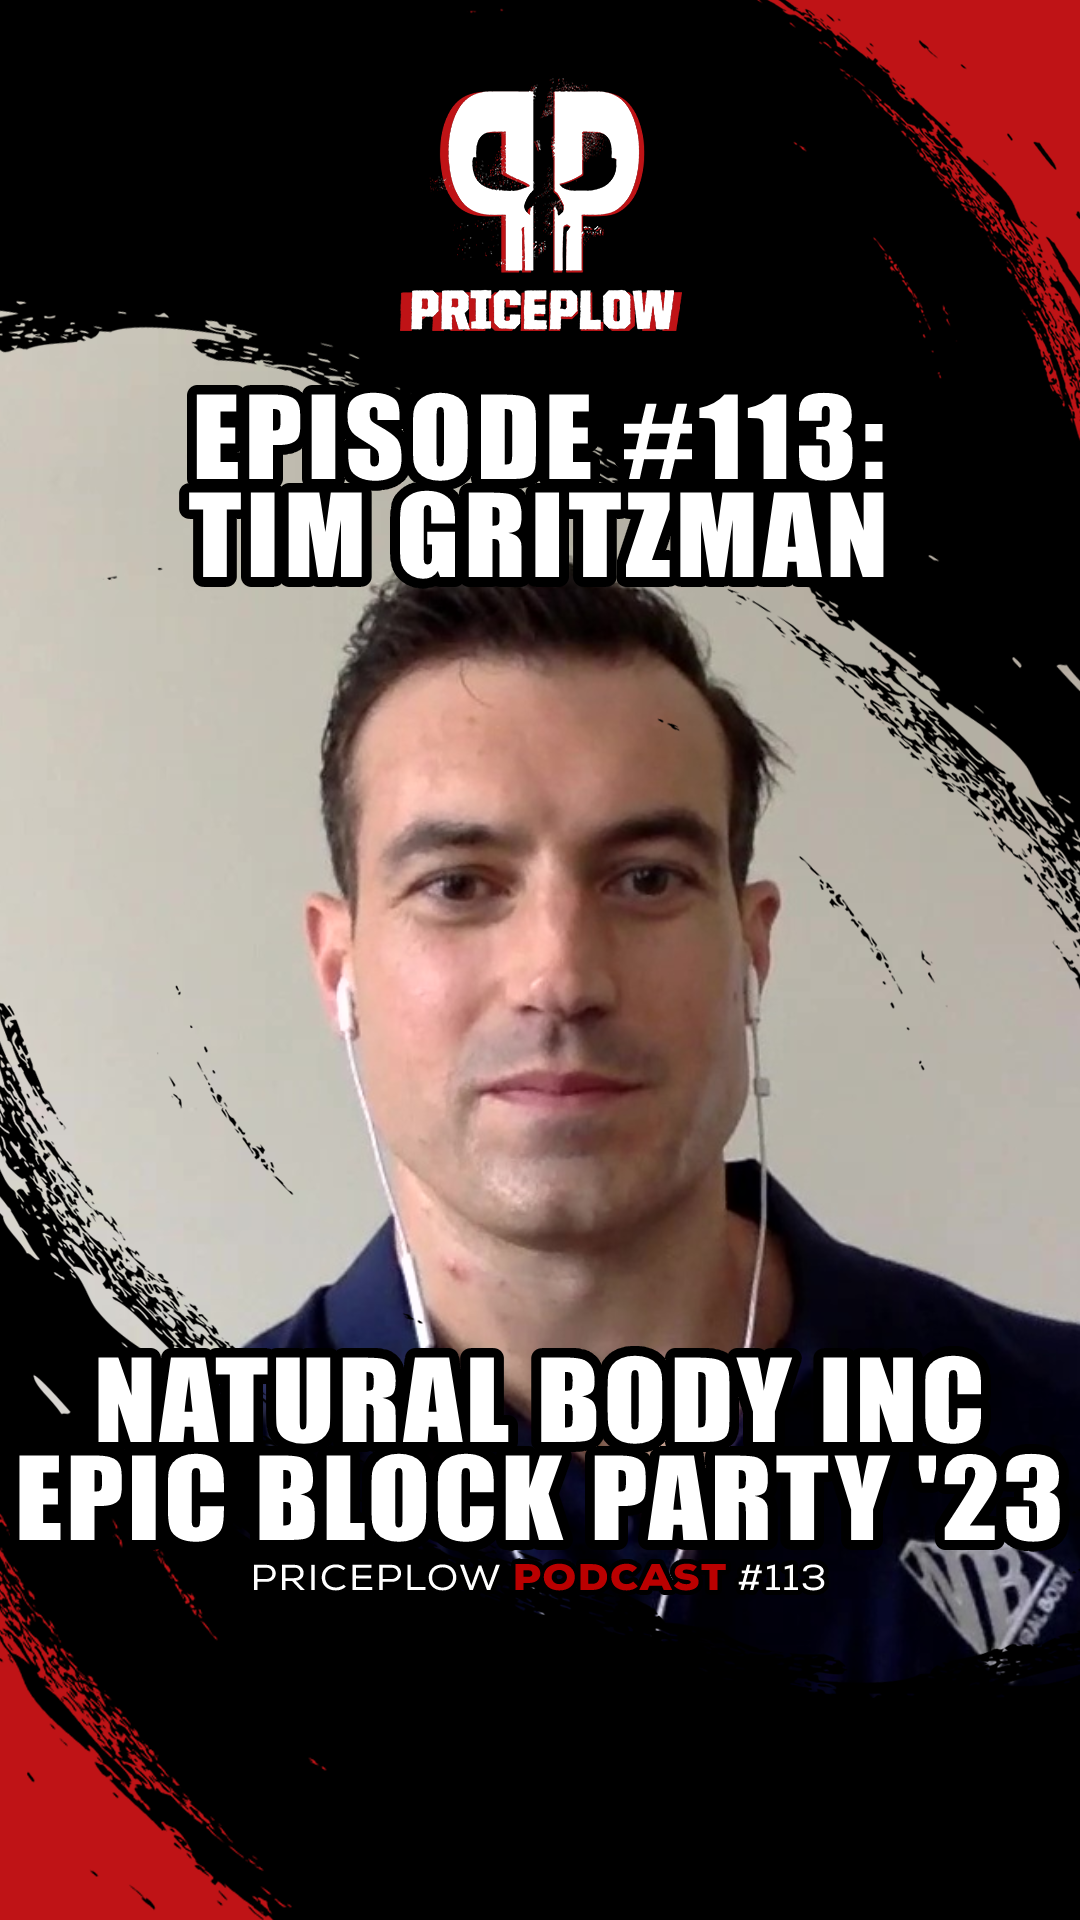 Tim Gritzman, Natural Body Inc on PricePlow Podcast Episode #113